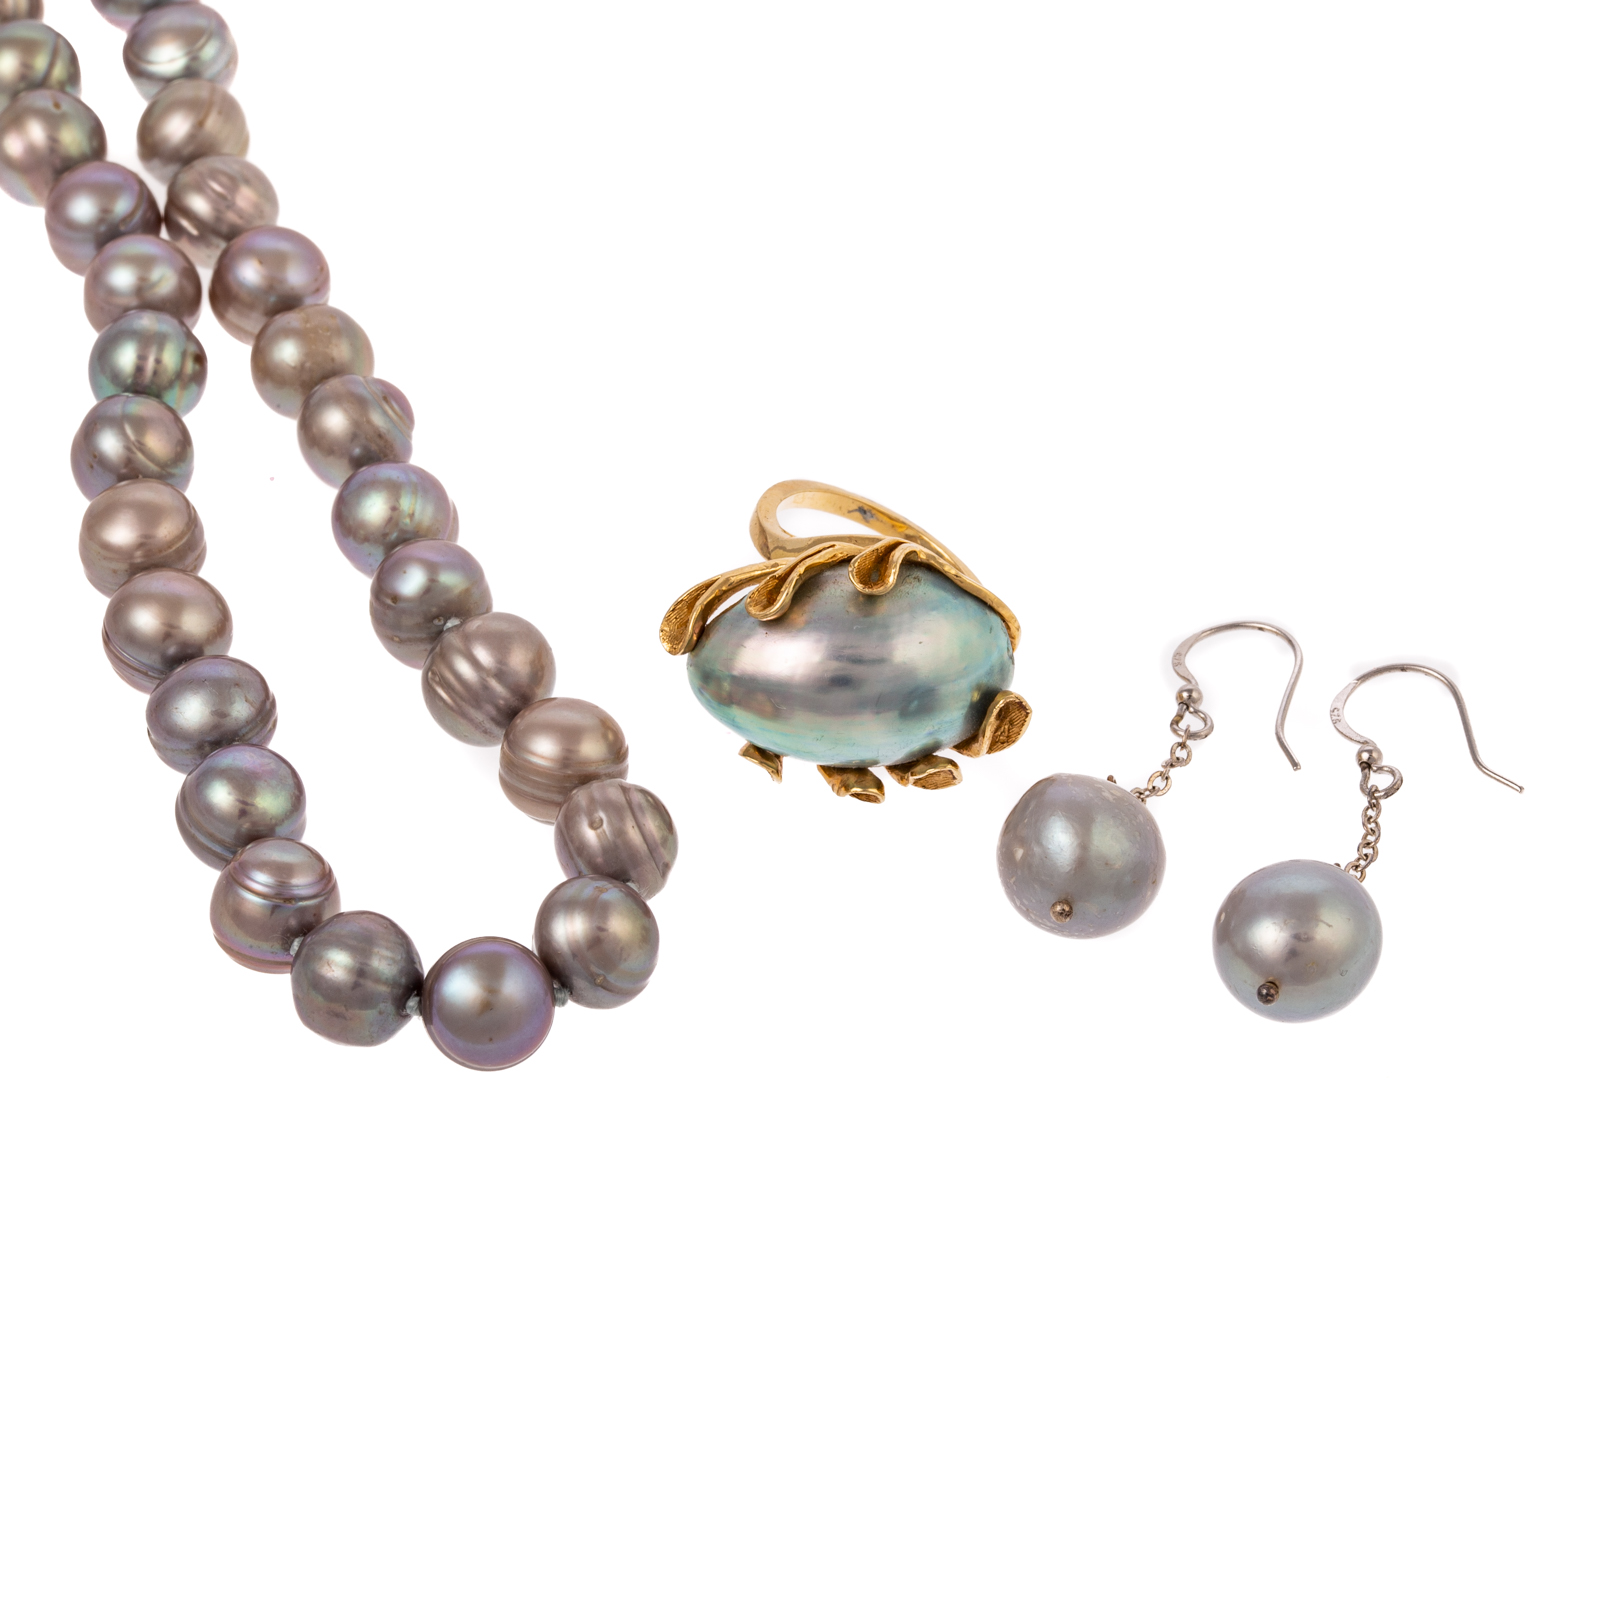 COLLECTION OF GRAY PEARL JEWELRY 2878bc